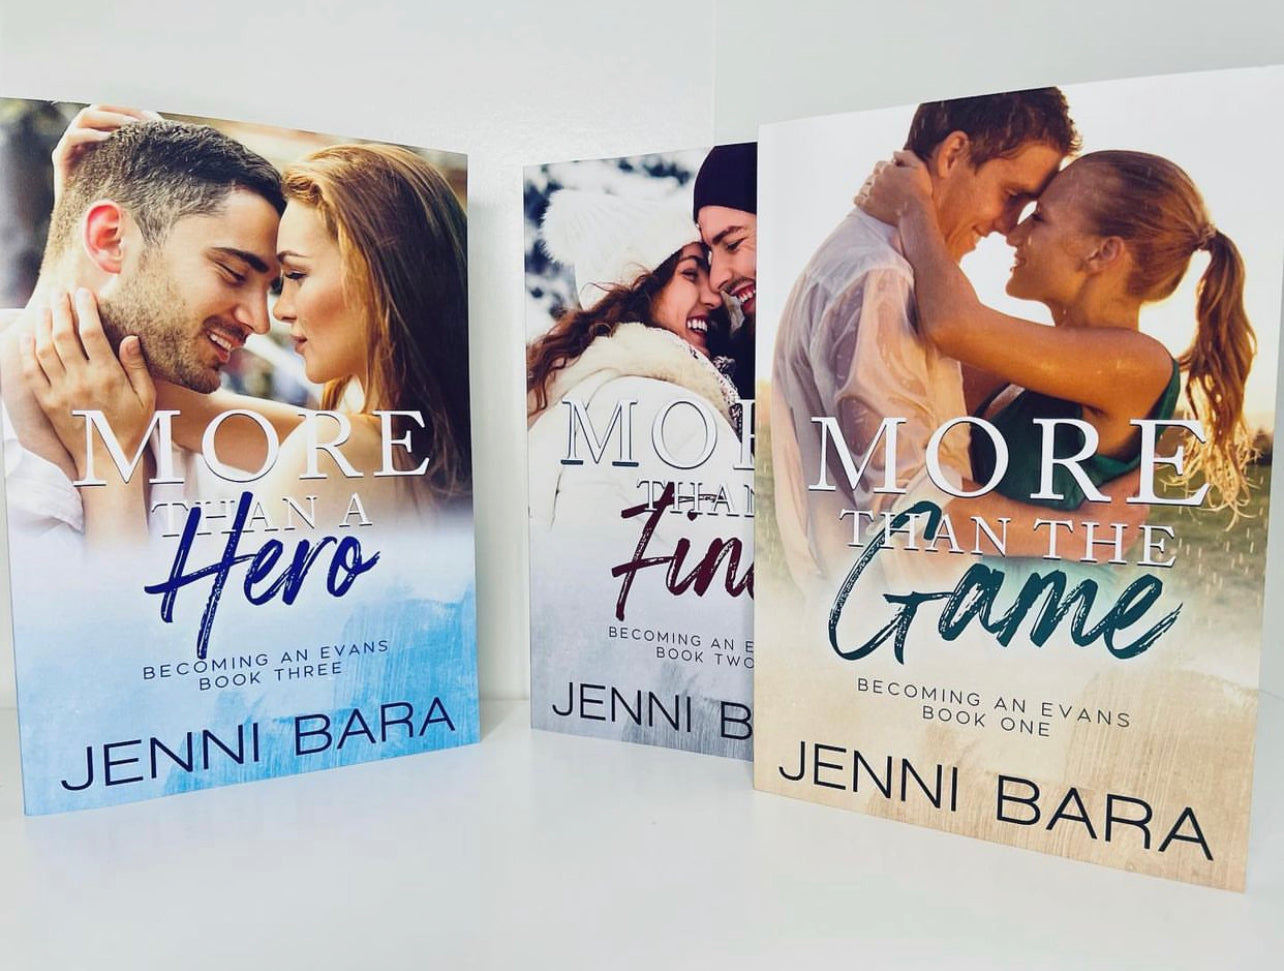 More Than a Hero by Jenni Bara (Becoming an Evans book 3)